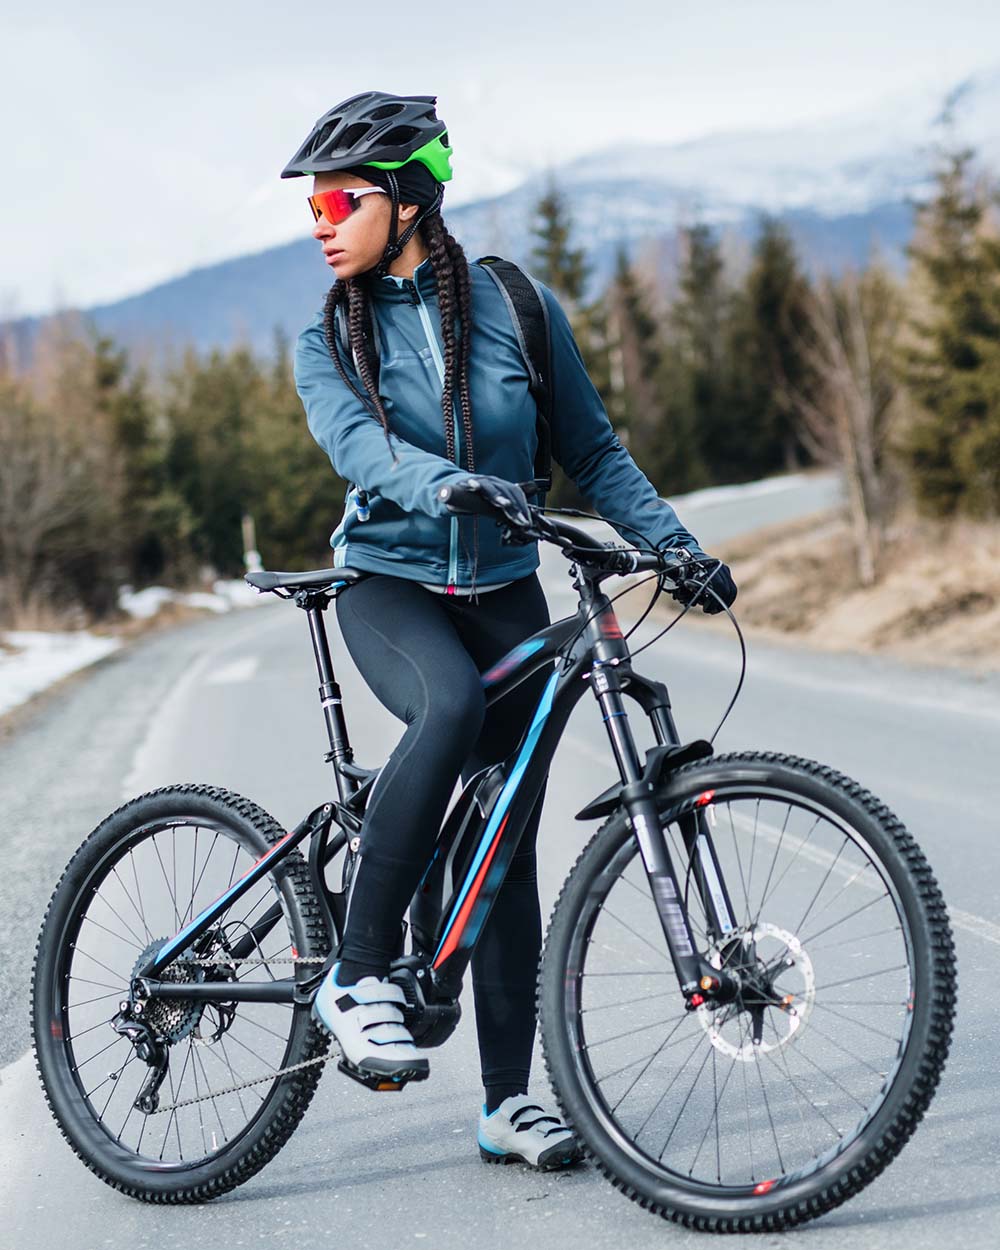 A female mountain biker standing on road outdoors in winter nature. Copy space.